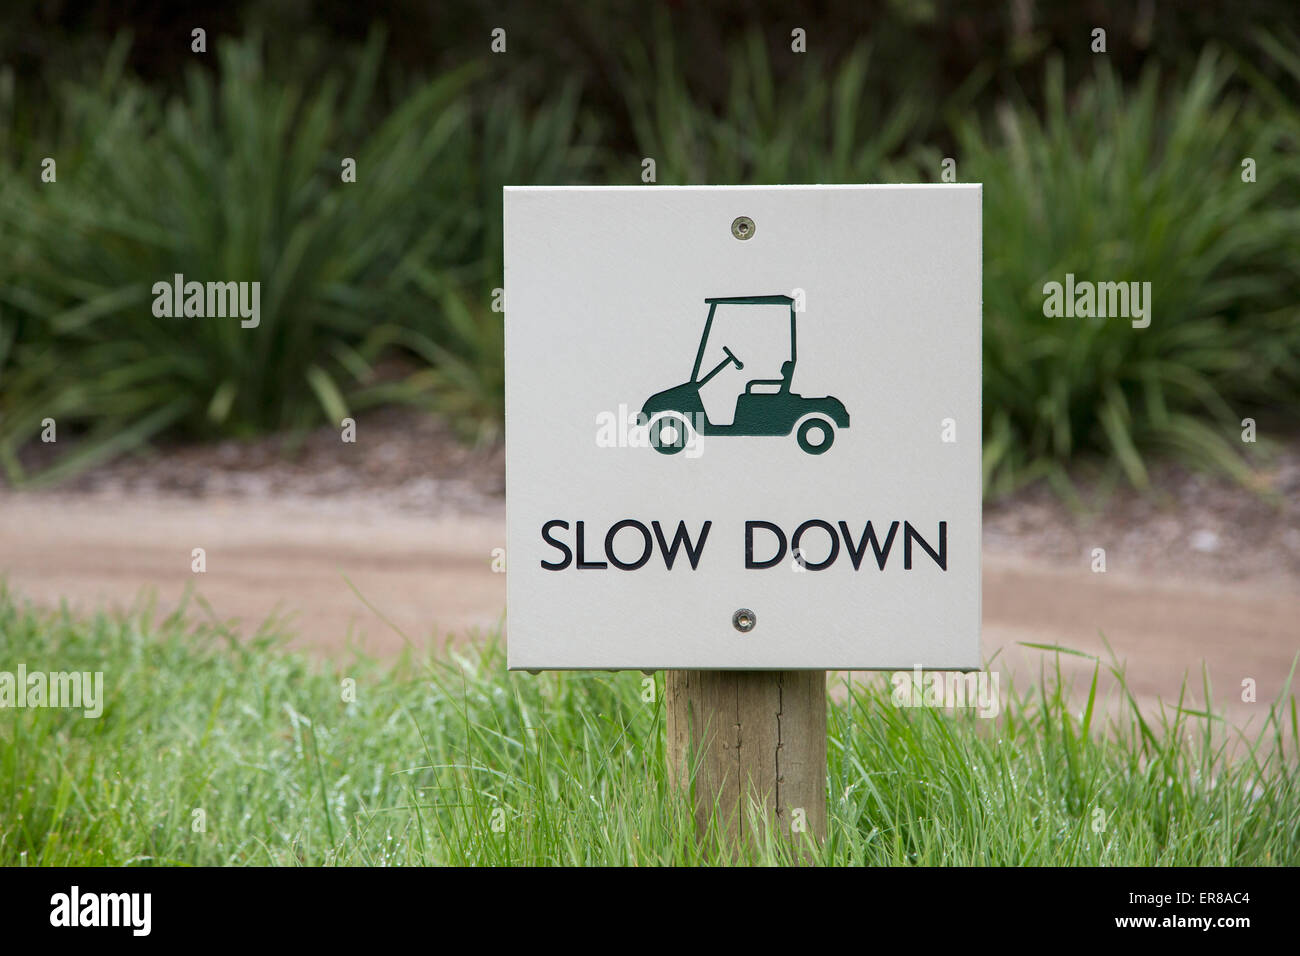 Slow down warning sign on field by dirt road Stock Photo